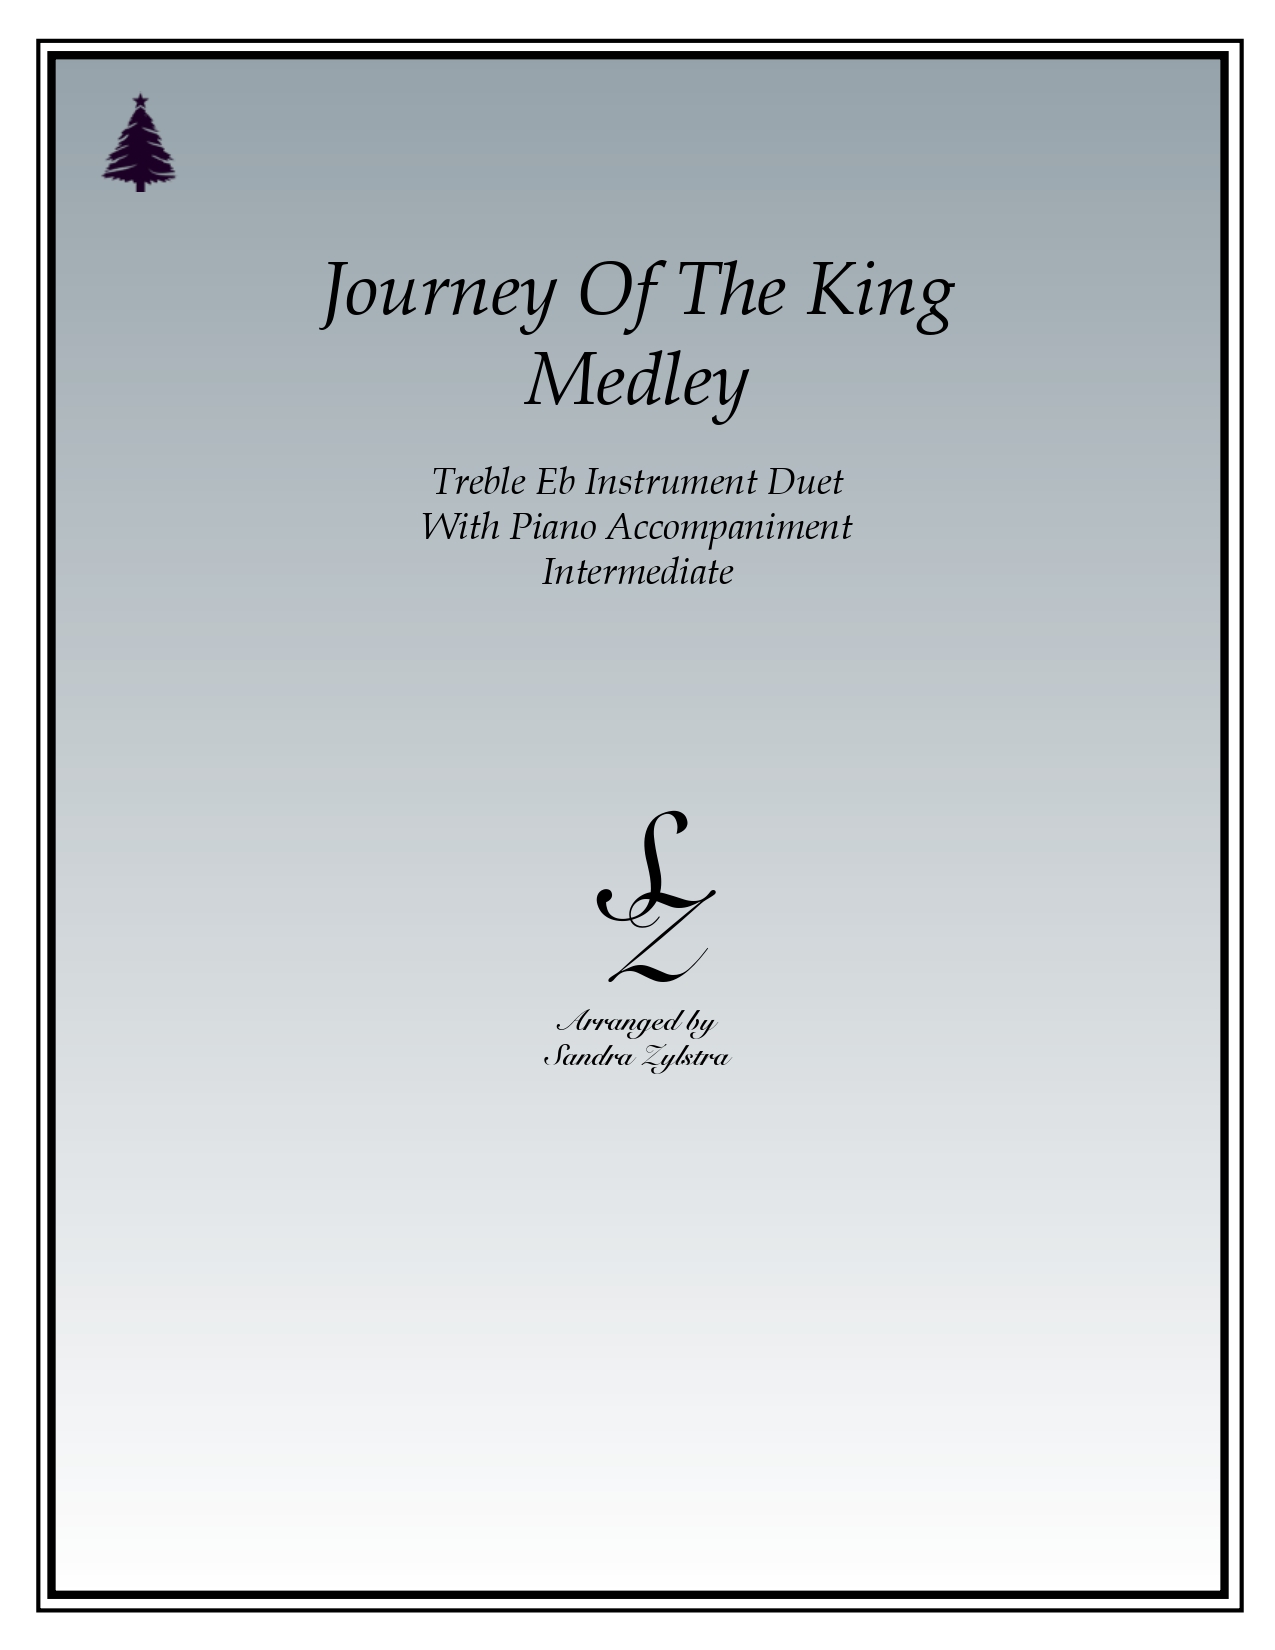 Journey Of The King Medley Eb instrument duet parts cover page 00011